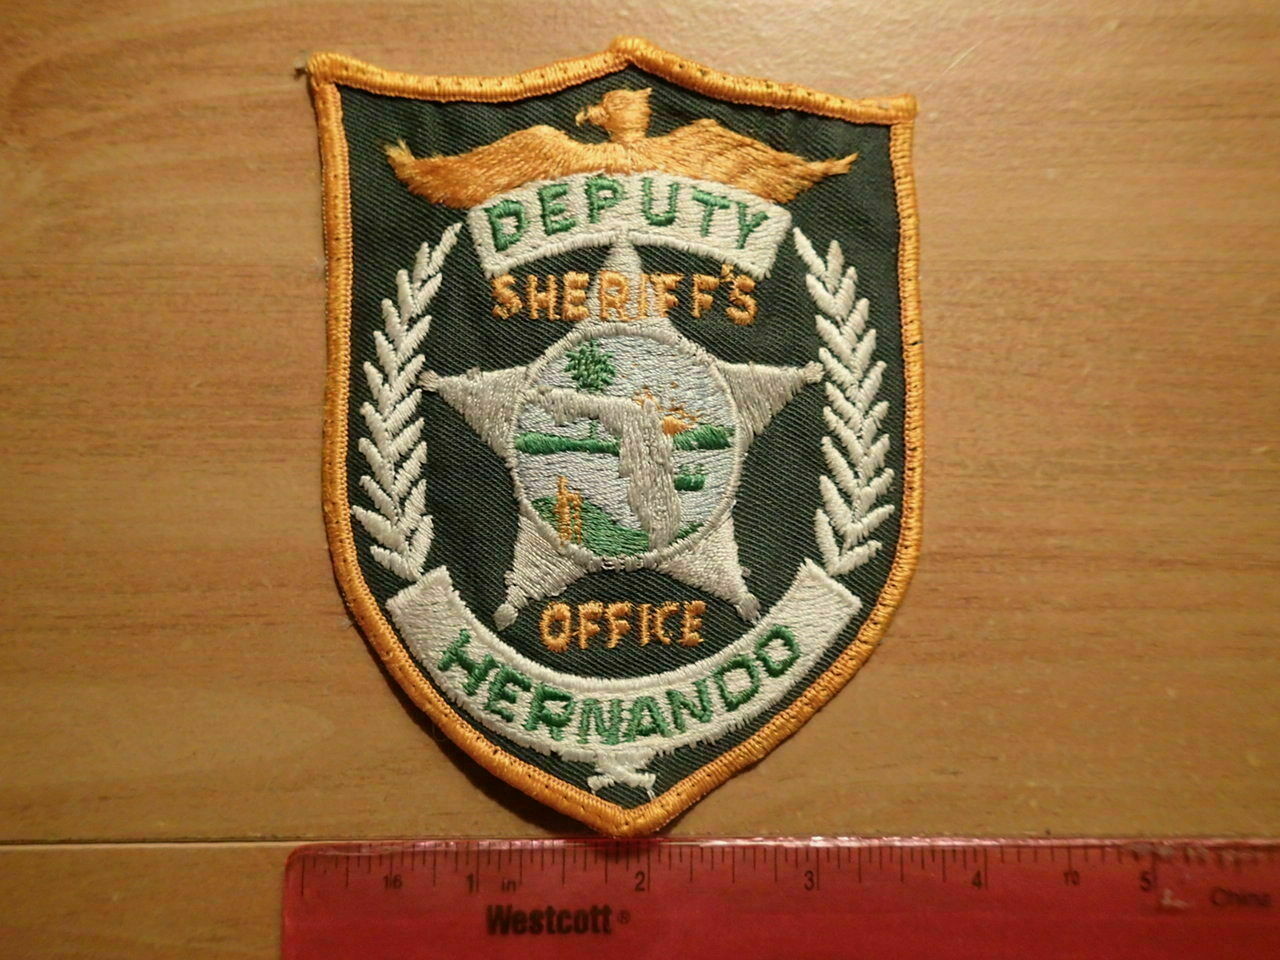 Embroidered Uniform Patch-DEPUTY SHERIFF'S OFFICE, HERNANDO, FLORIDA-Excellent